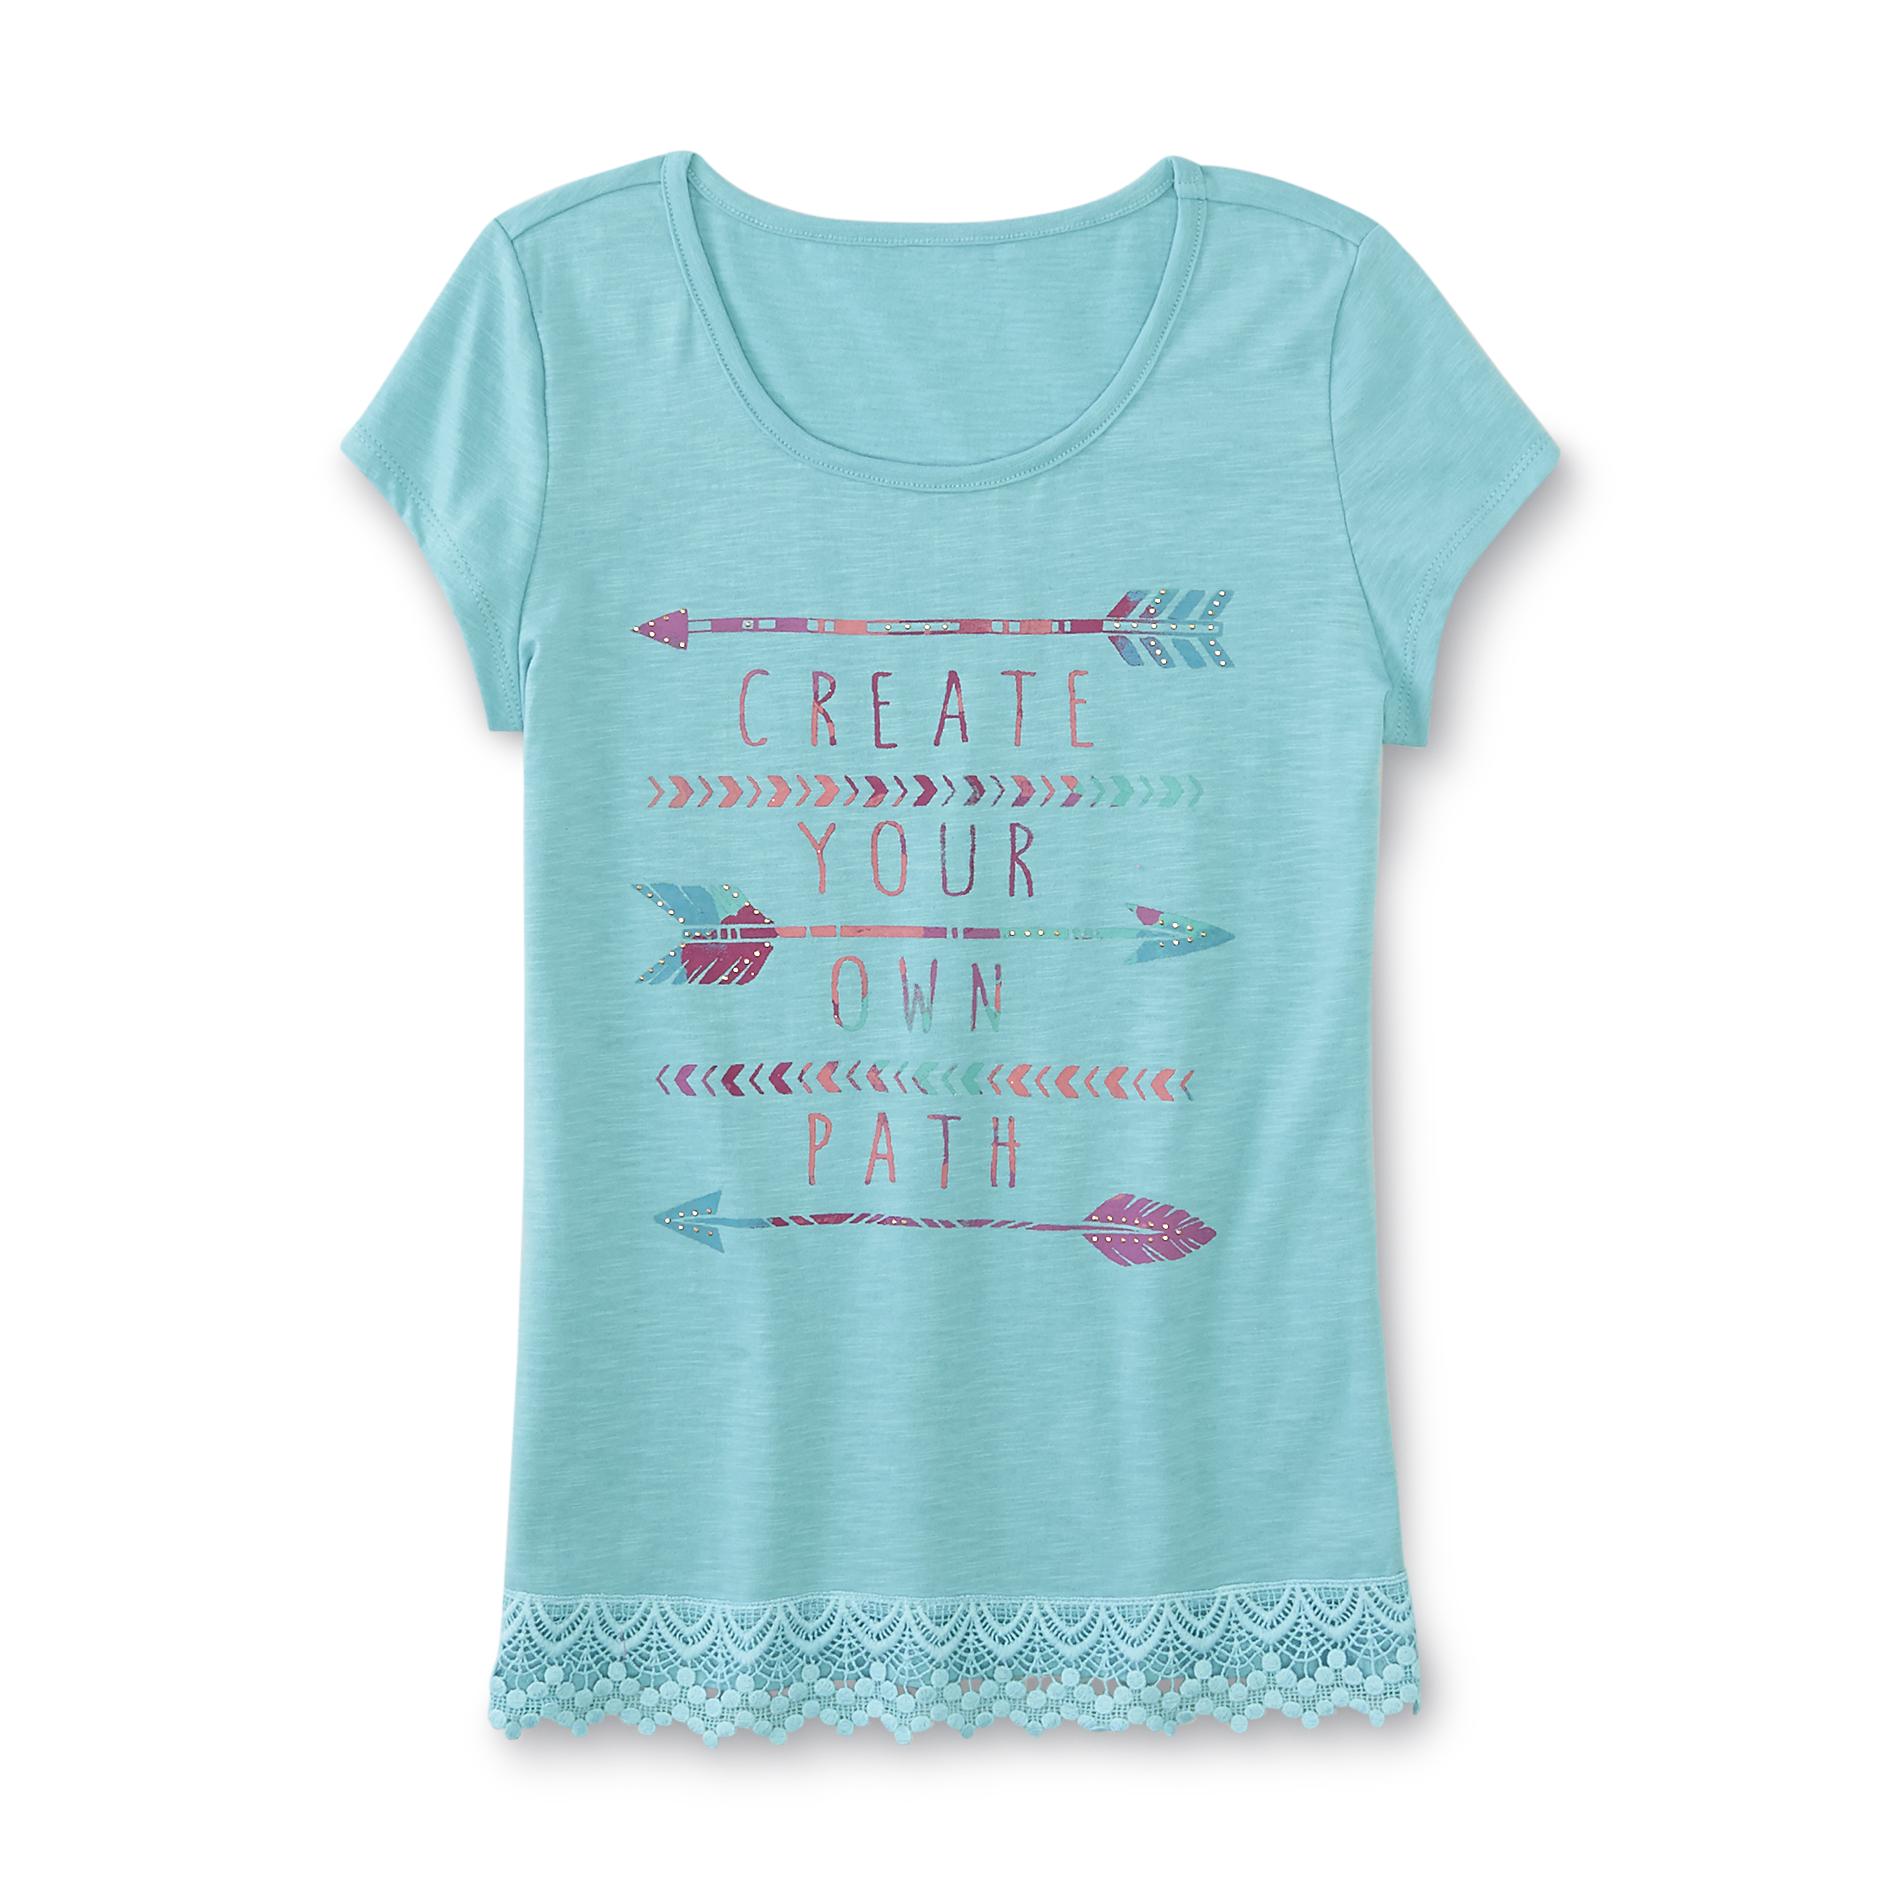 Canyon River Blues Girl's Graphic T-Shirt - Create Your Own Path